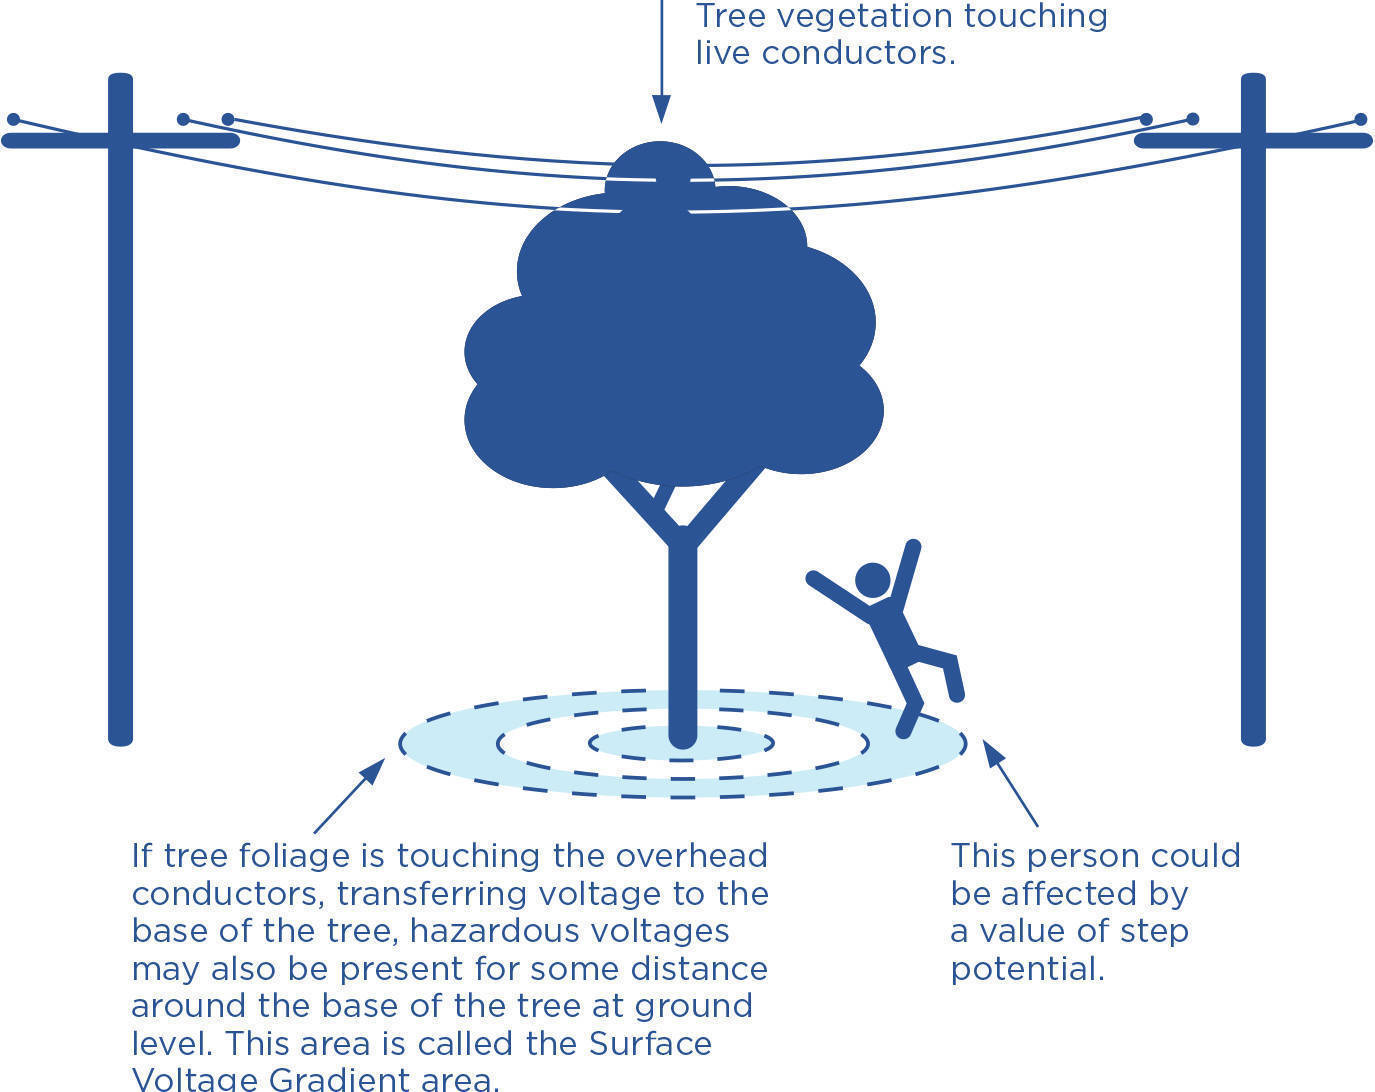 Diagram showing the affect of what happens when trees touch live conductors